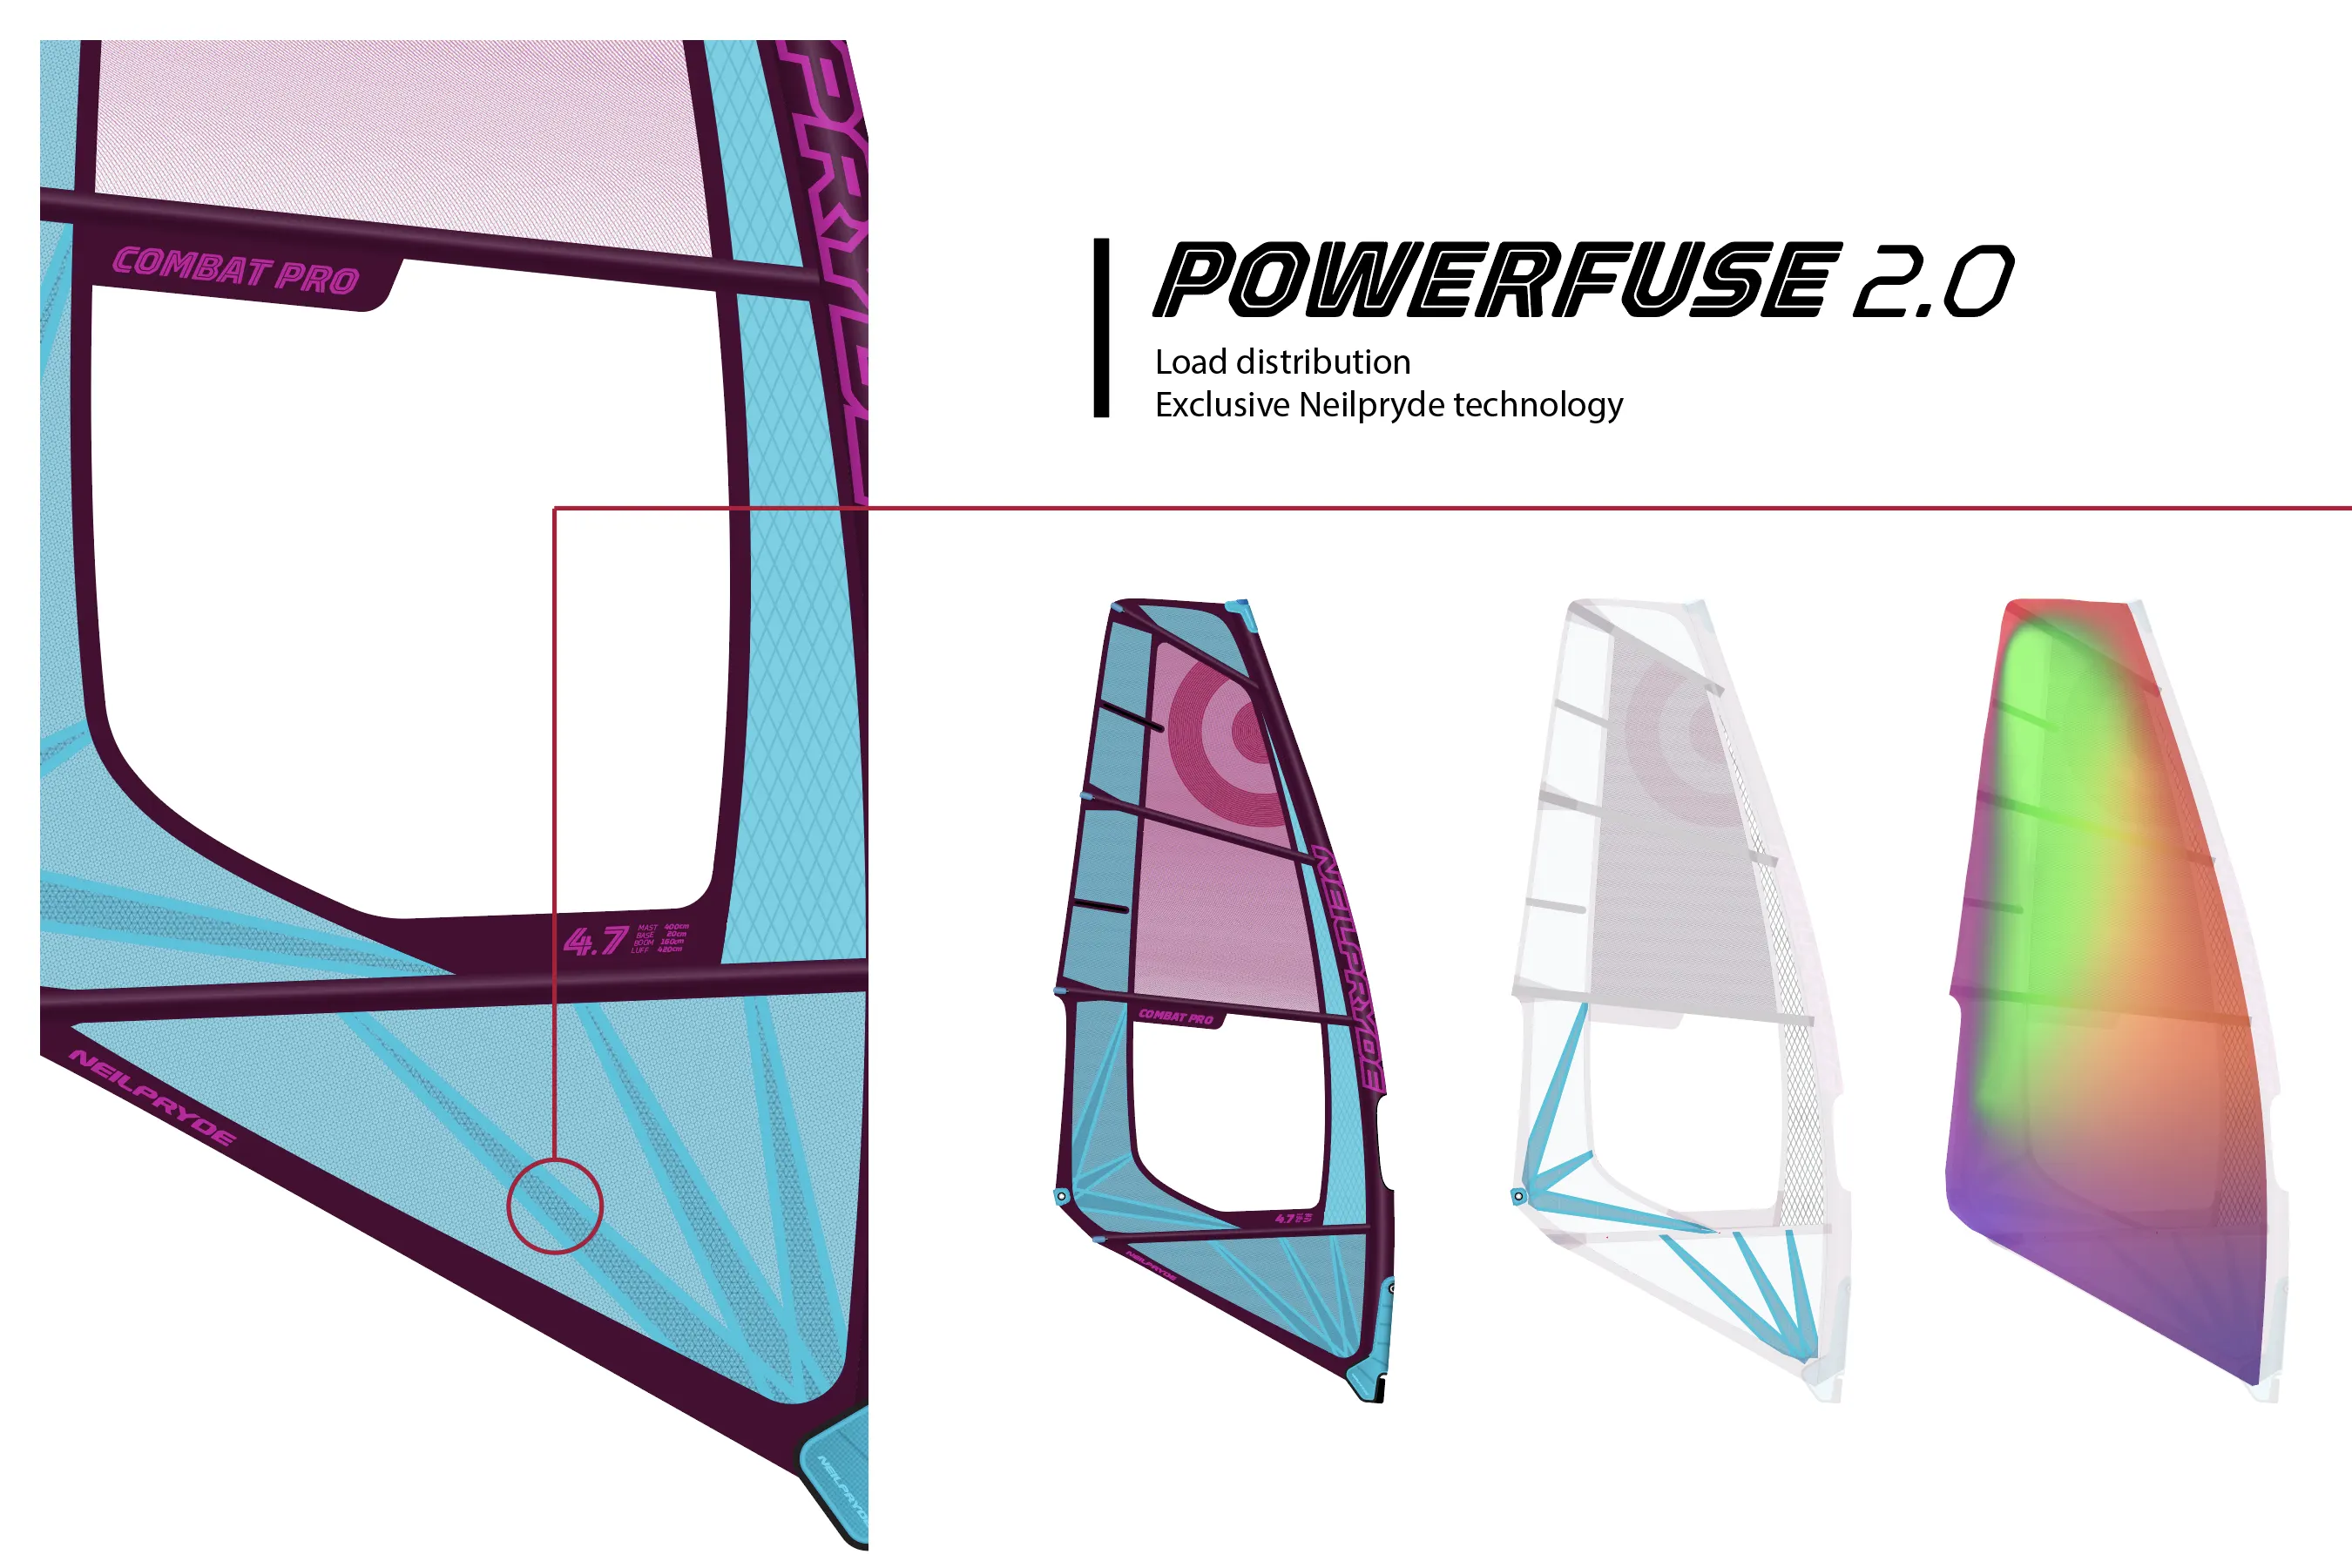 Powerfuse 2.0